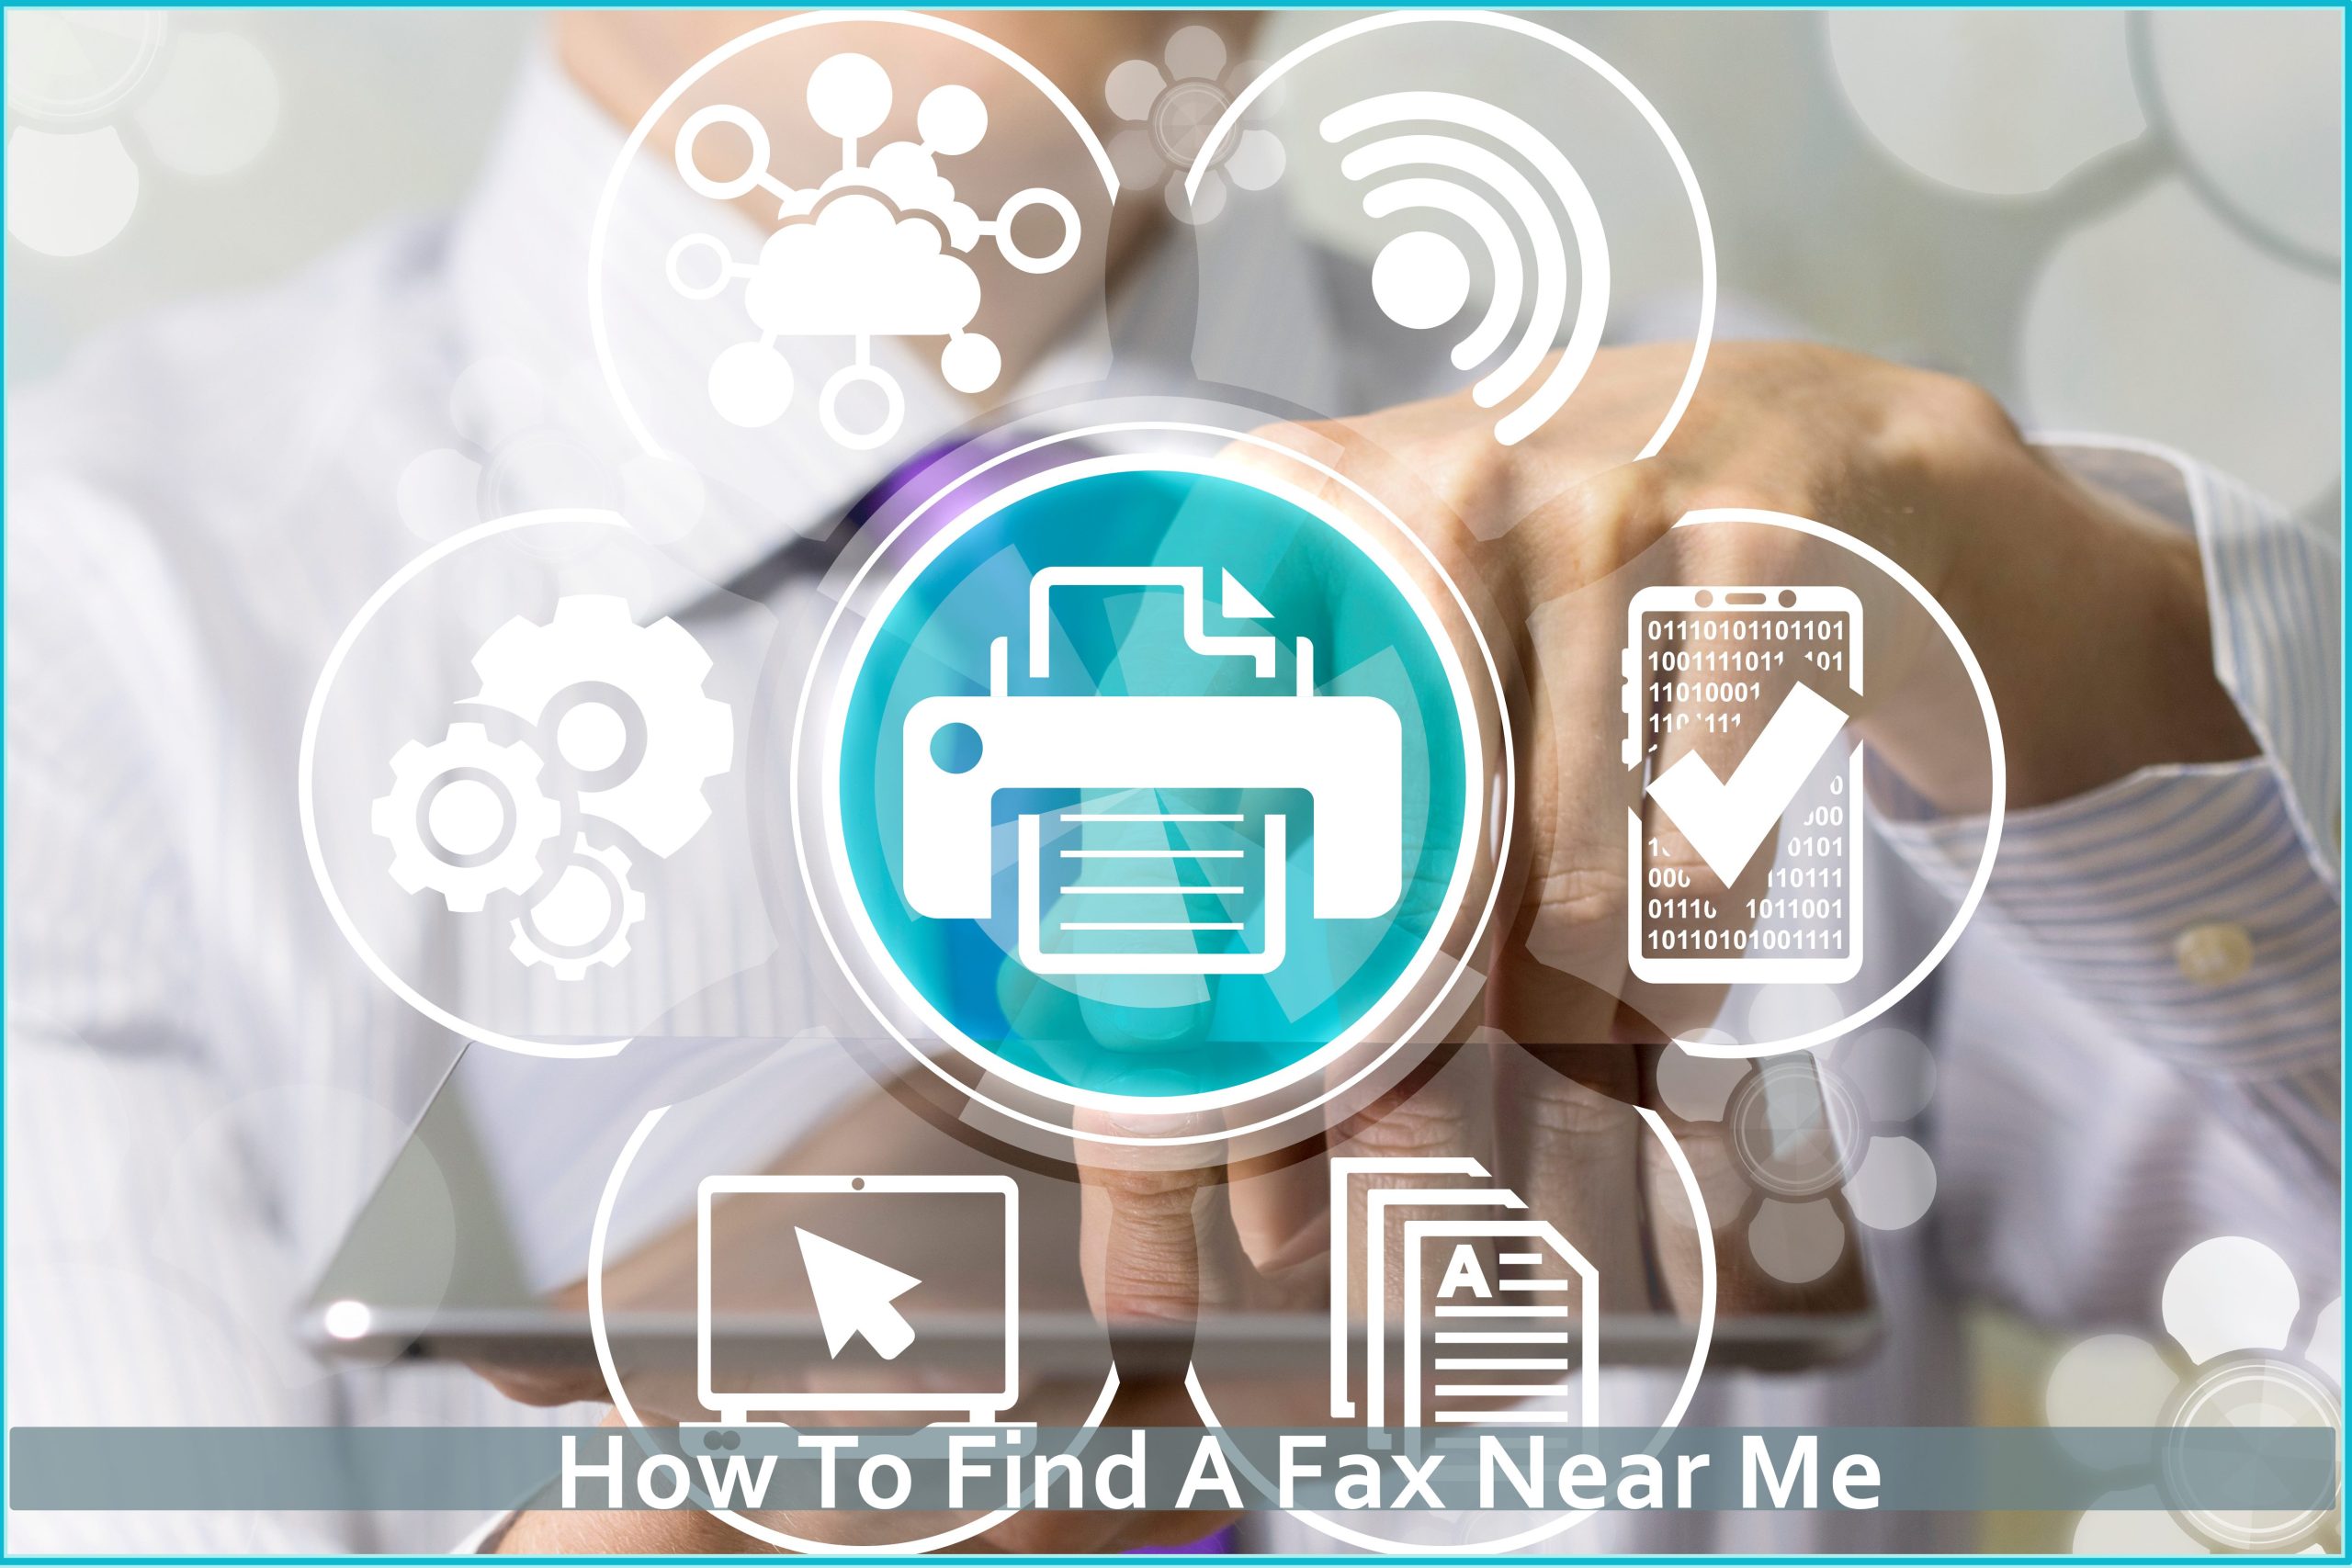 How To Find A Fax Near Me